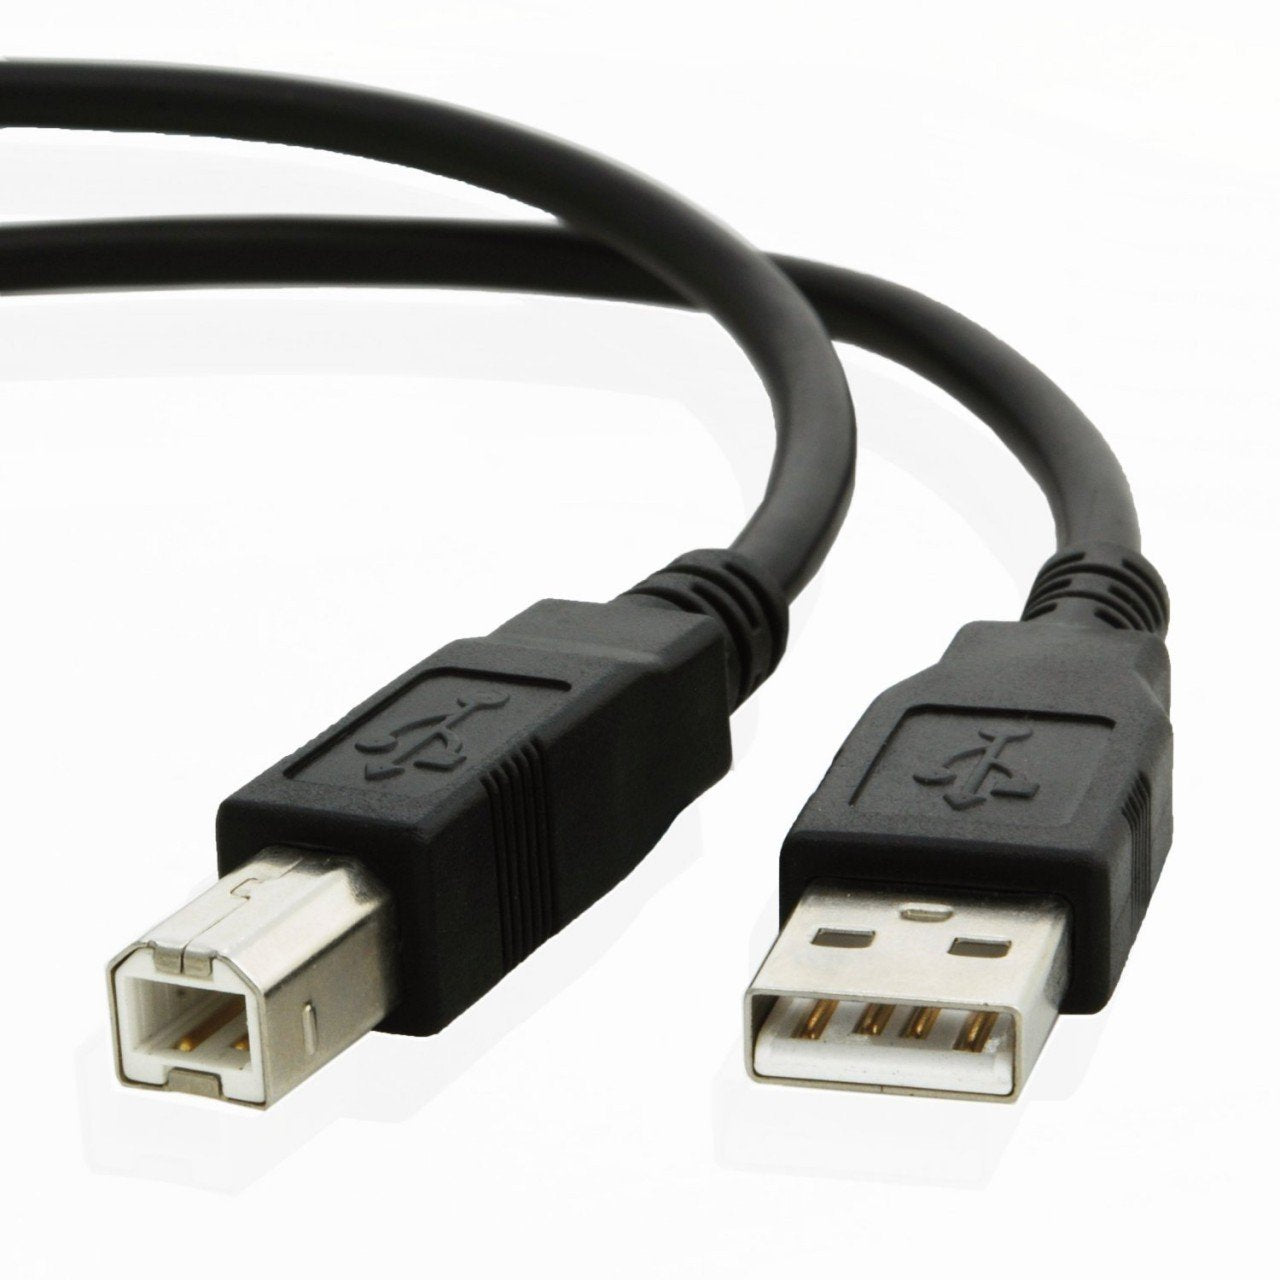 USB cable for Brother LASERJET PRO M227fdw